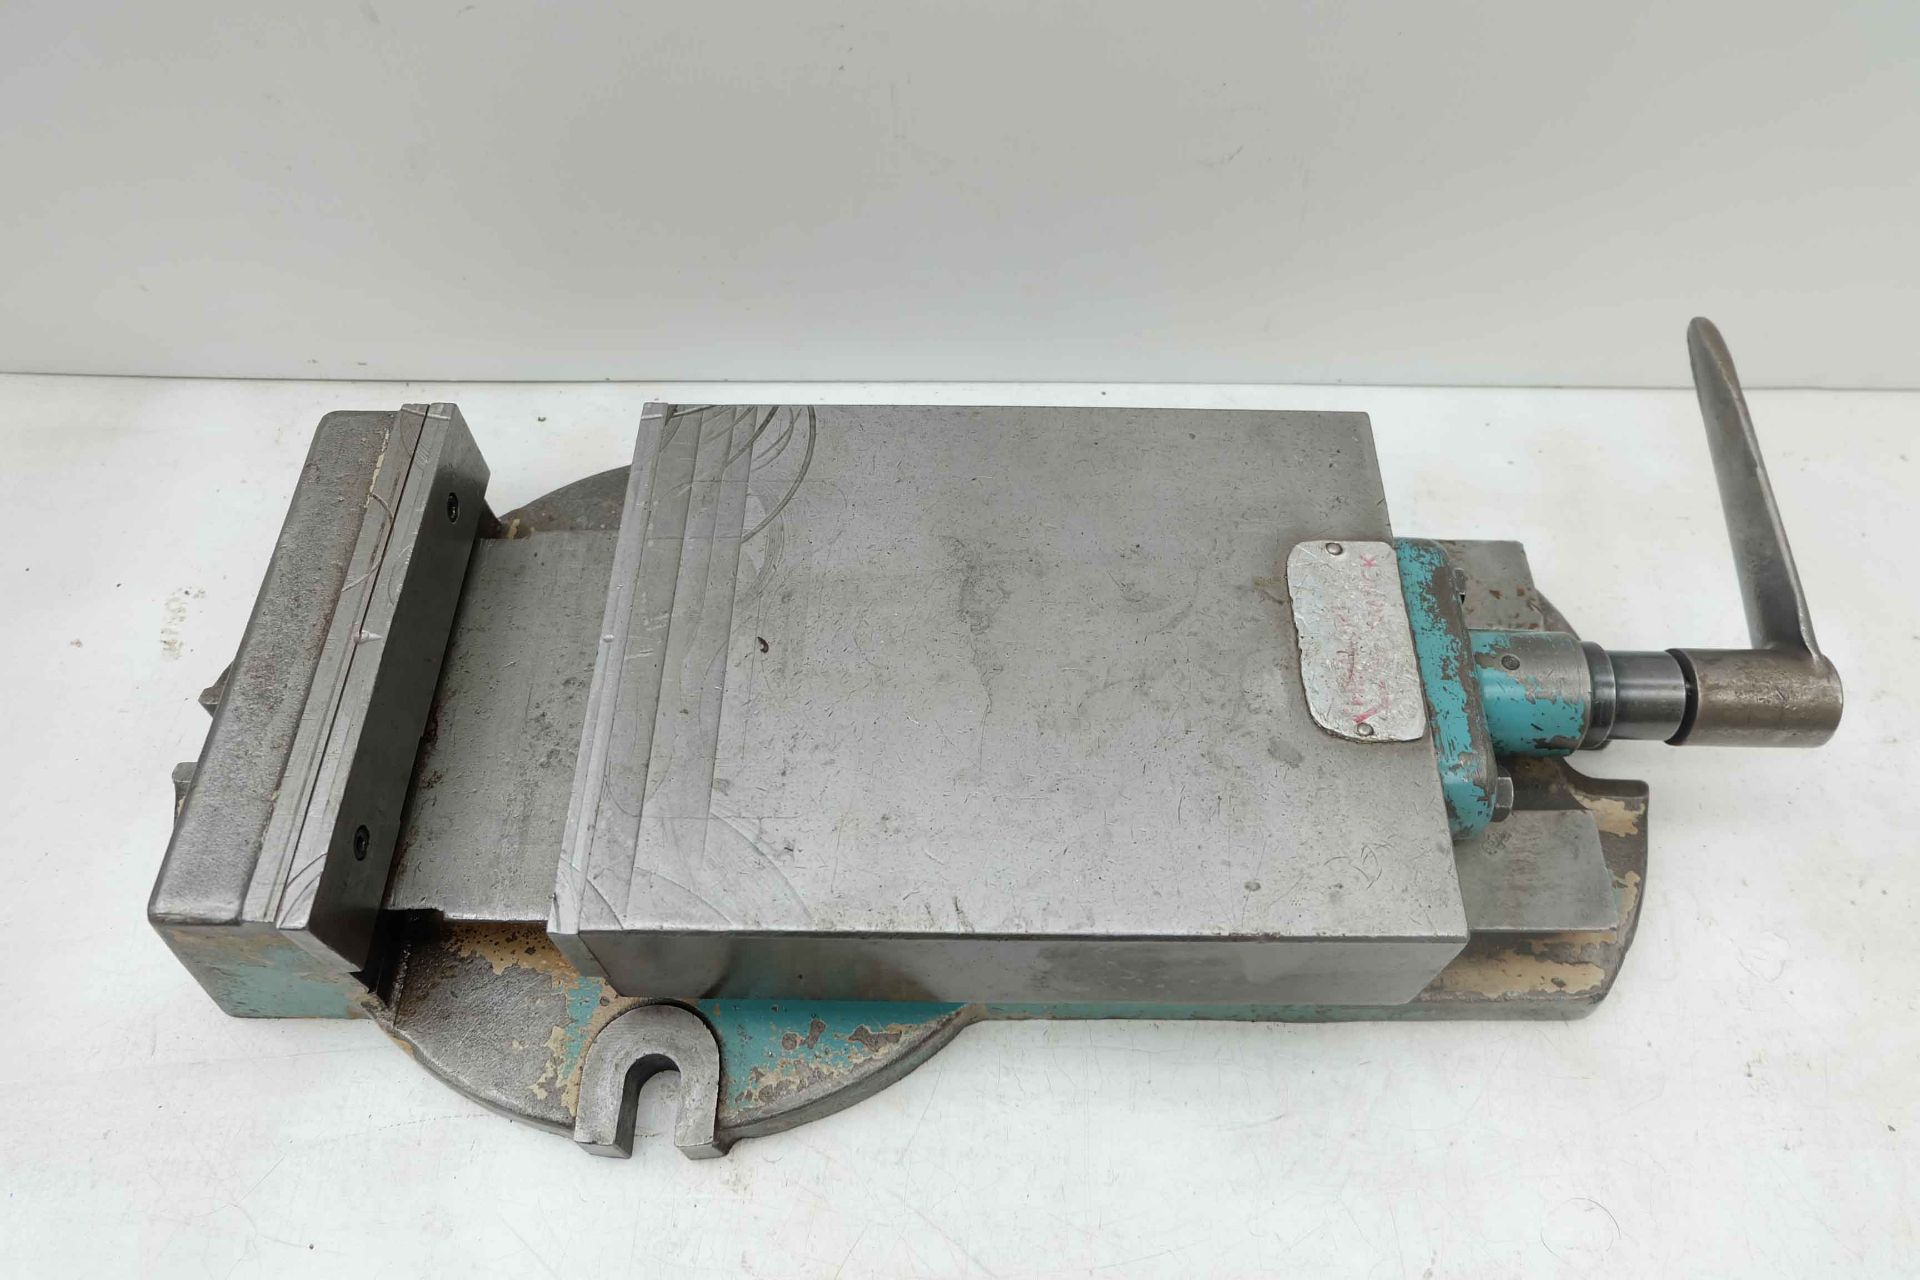 Abwood 8" Machine Vice Width of Jaws 8". Opening of Jaws 7". - Image 2 of 5